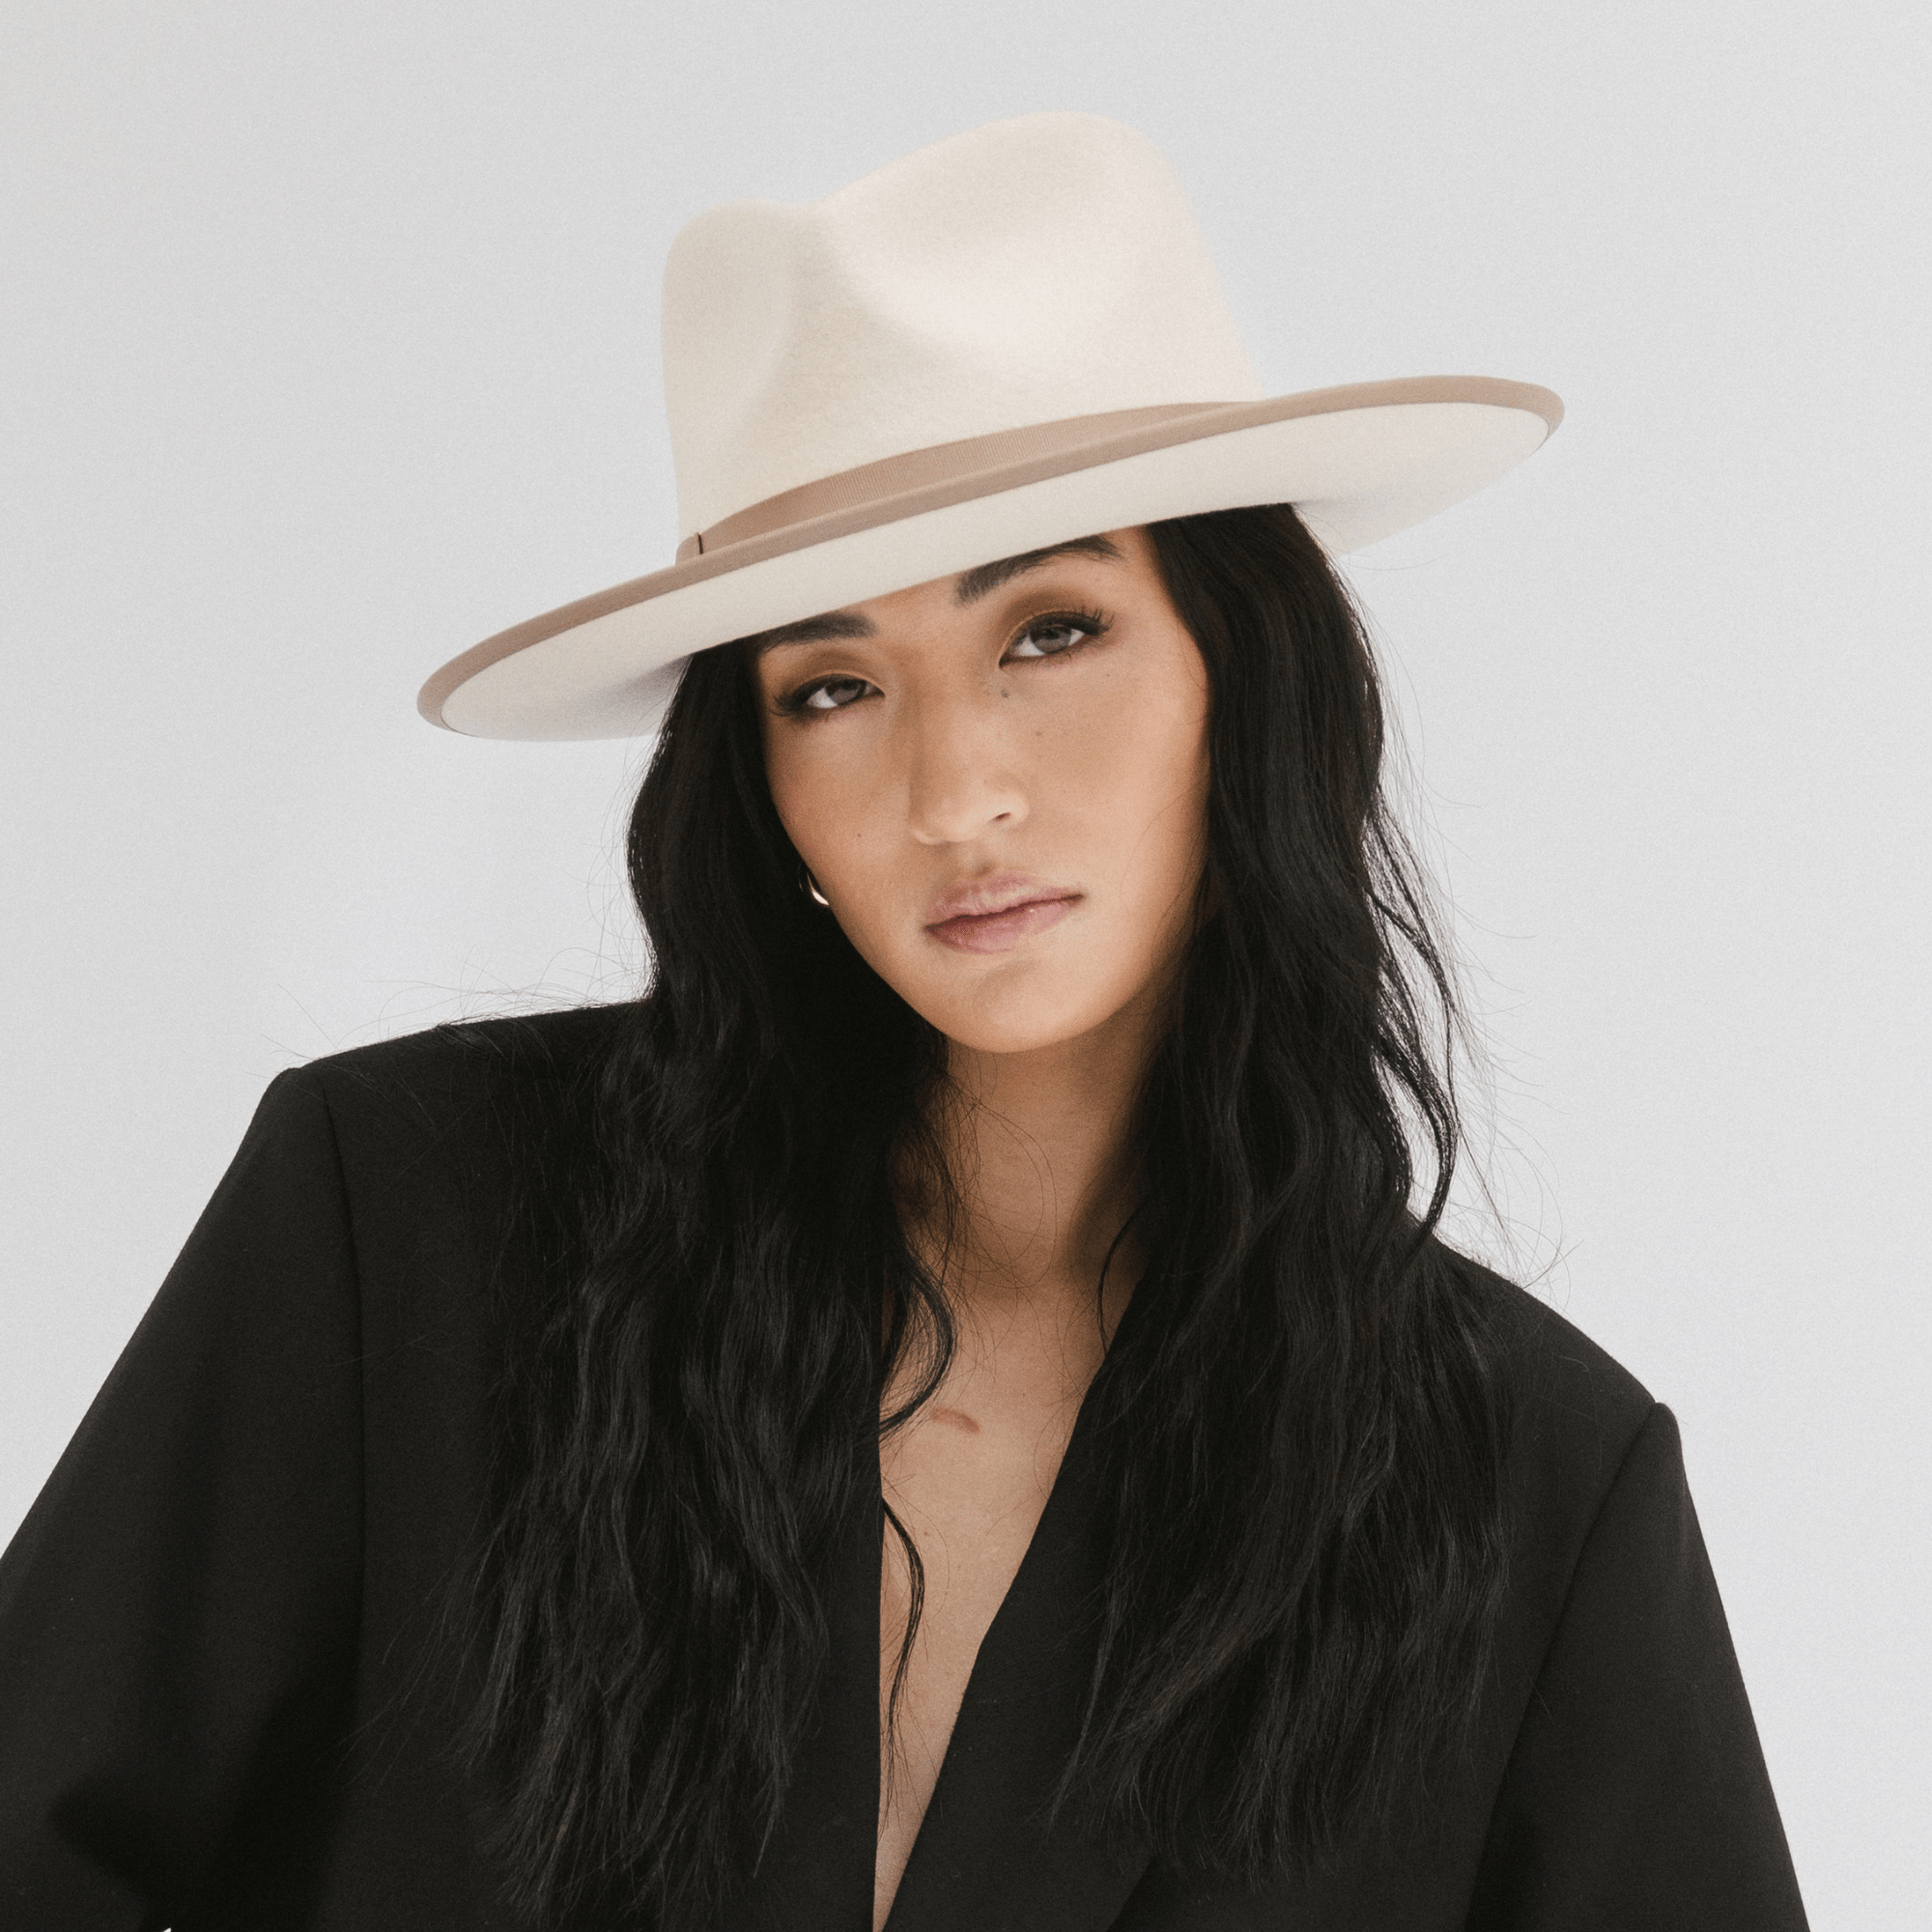 Gigi Pip felt hats for women - Monroe Rancher - fedora teardrop crown with stiff, upturned brim adorned with a tonal grosgrain band on the crown and brim [white-taupe]